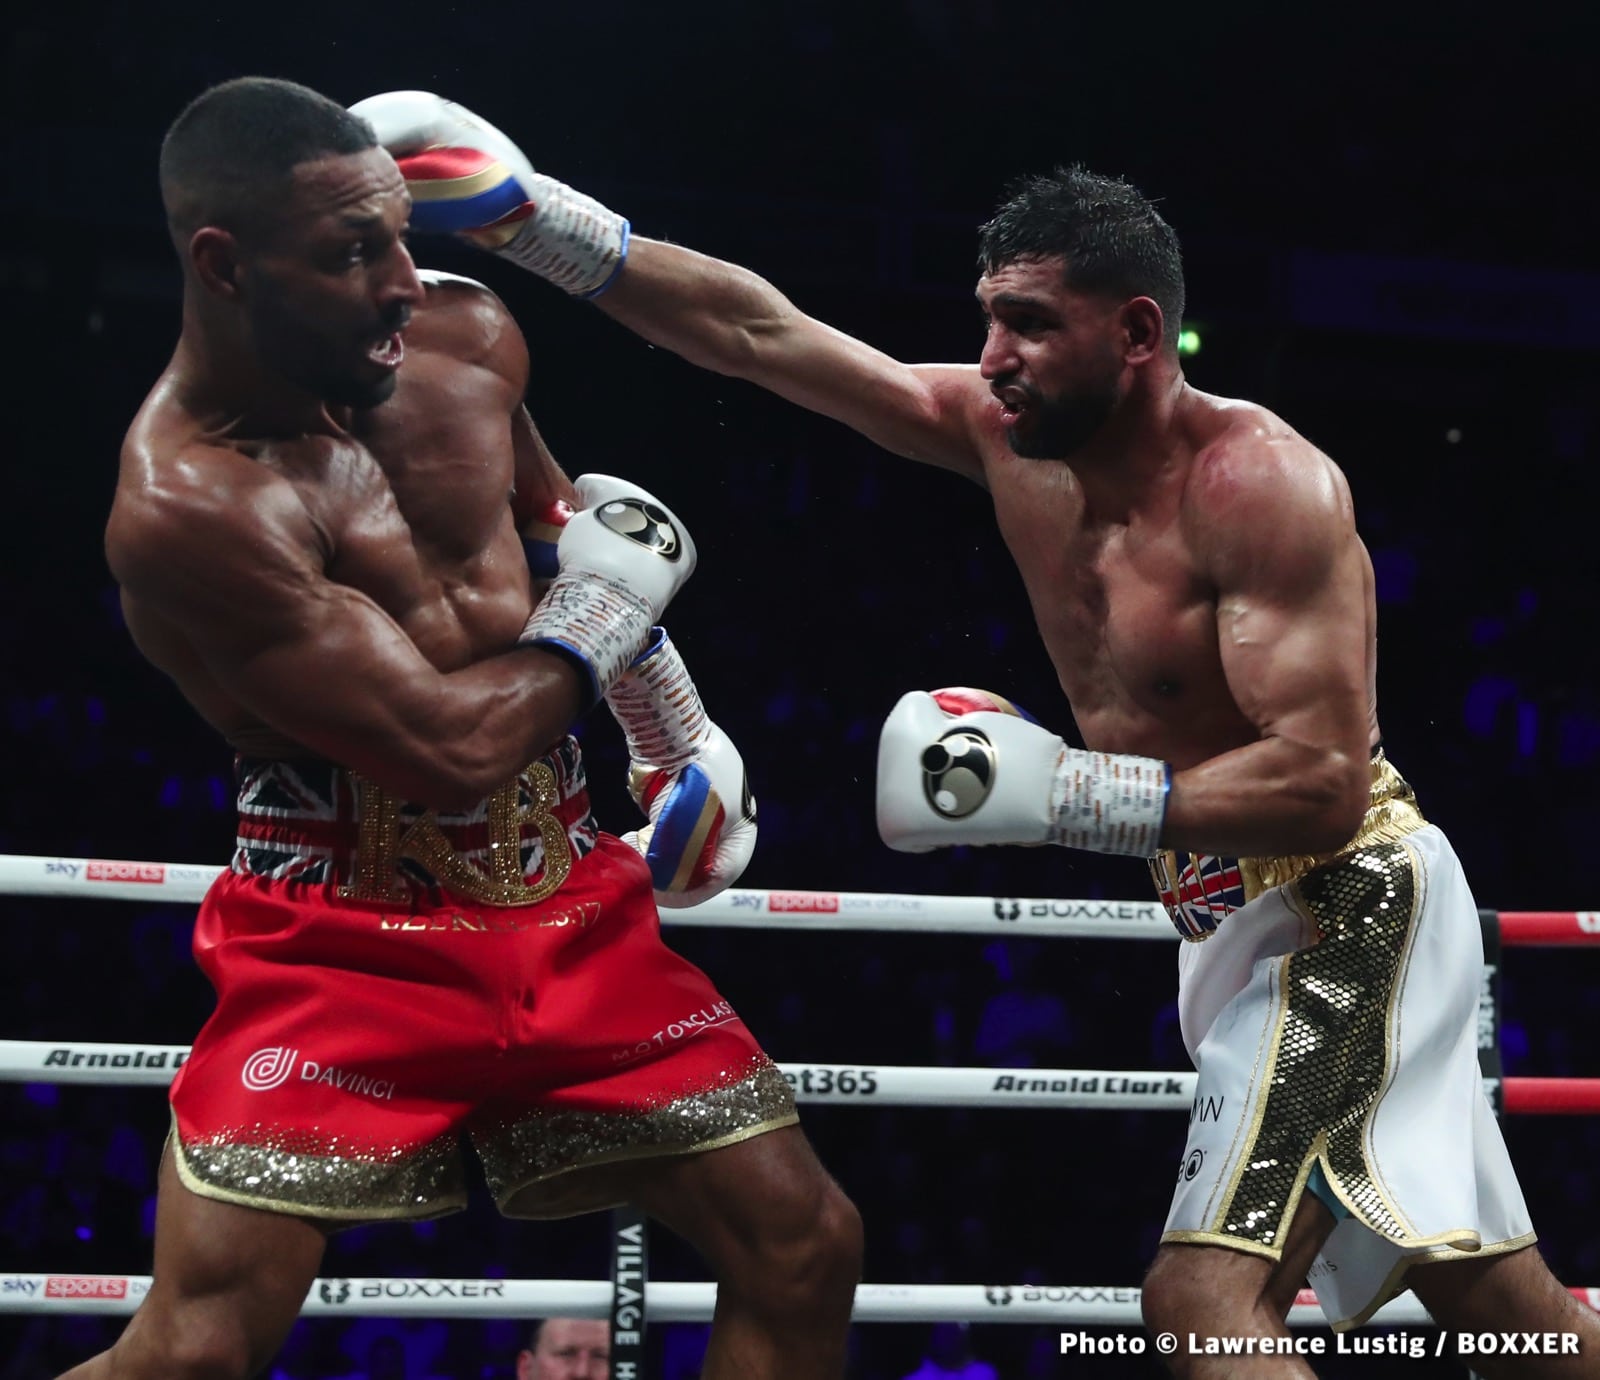 Image: Ben Shalom wants Amir Khan to show "he's not finished" before given Brook rematch